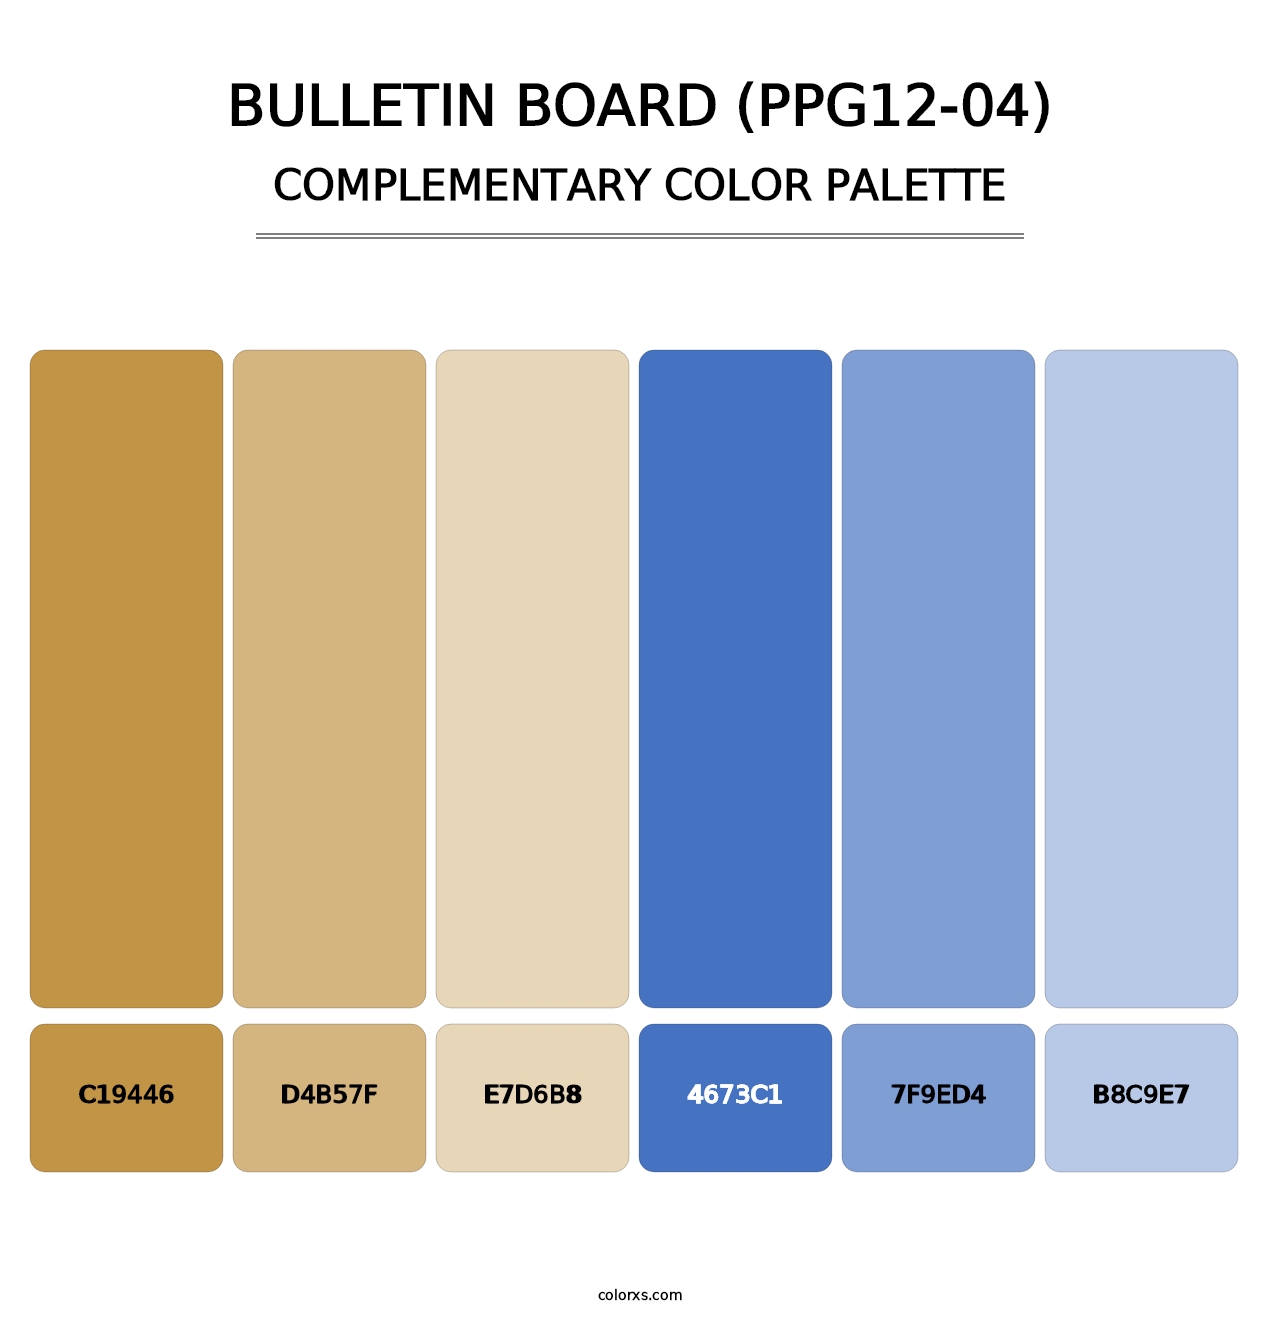 Bulletin Board (PPG12-04) - Complementary Color Palette